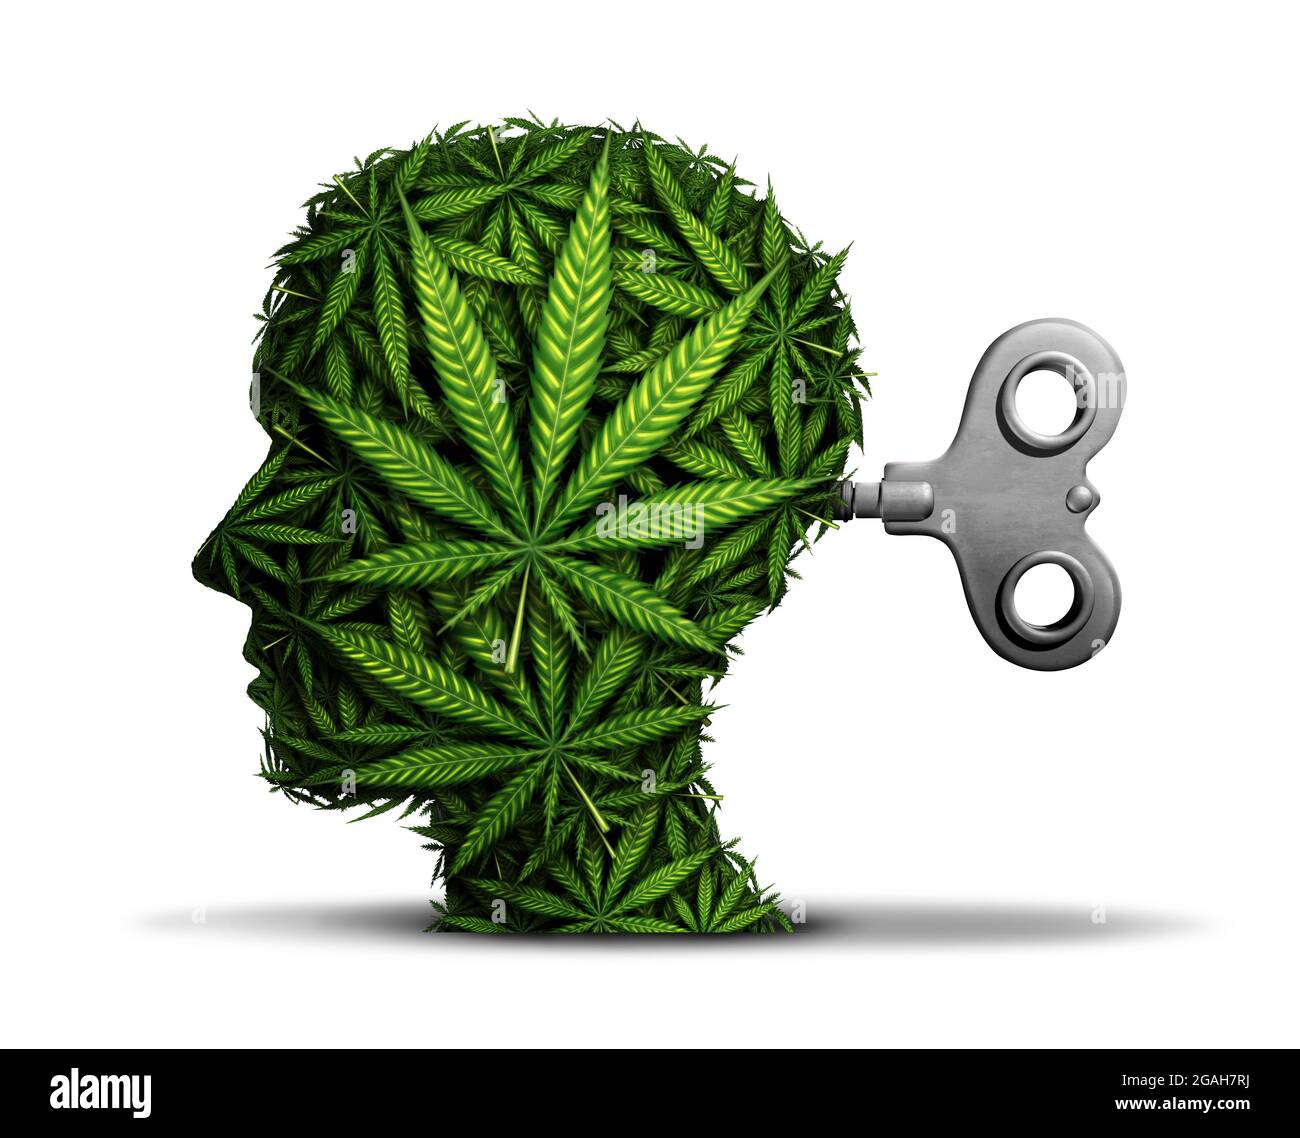 Marijuana business and Cannabis industry or mental function with the use of pot as a psychiatric concept and the effects on the brain. Stock Photo